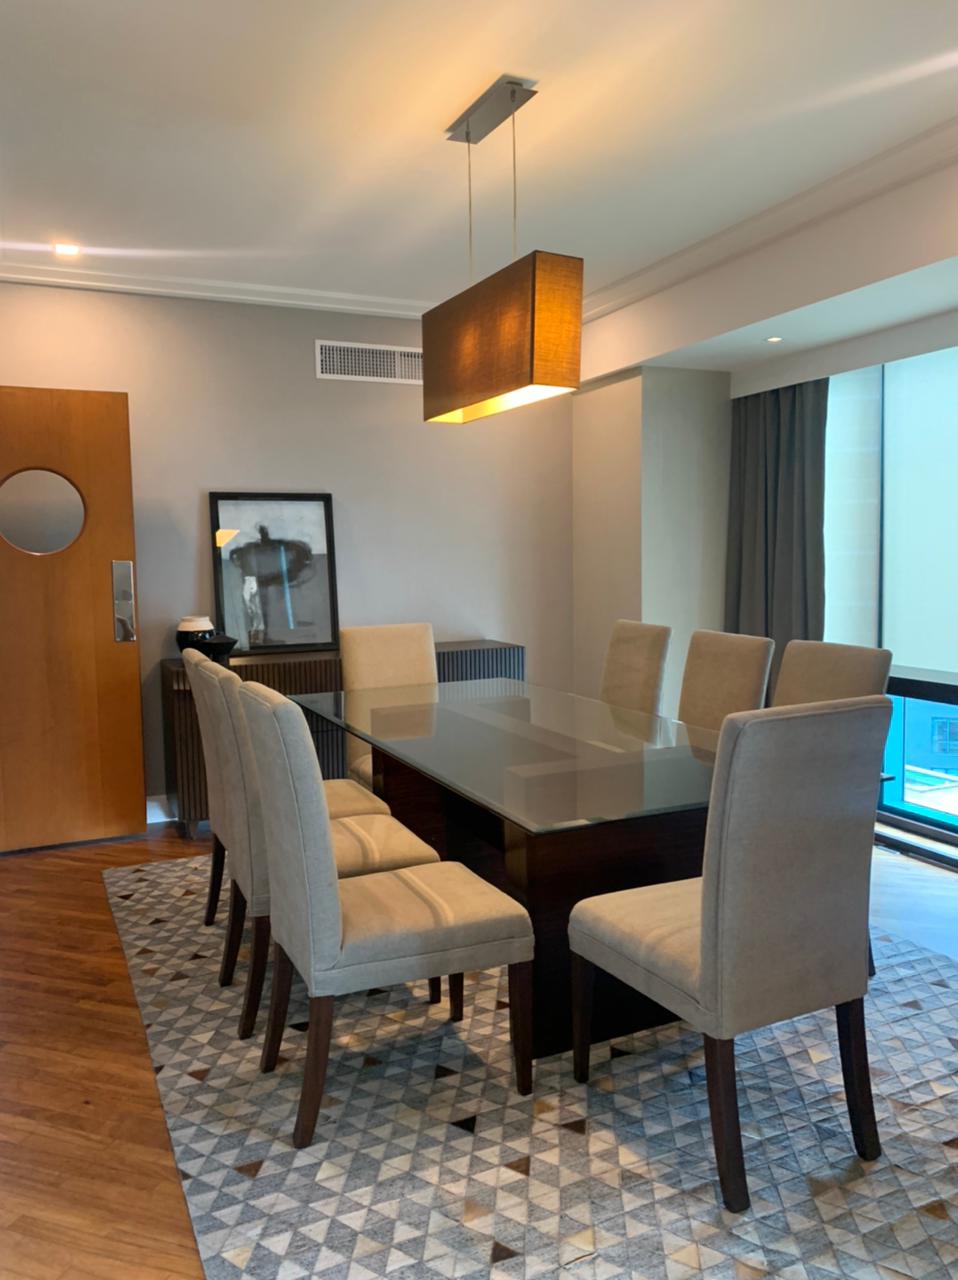 2 Bedroom Condominium for Lease is Located at Amorsolo Square Rockwell Makati